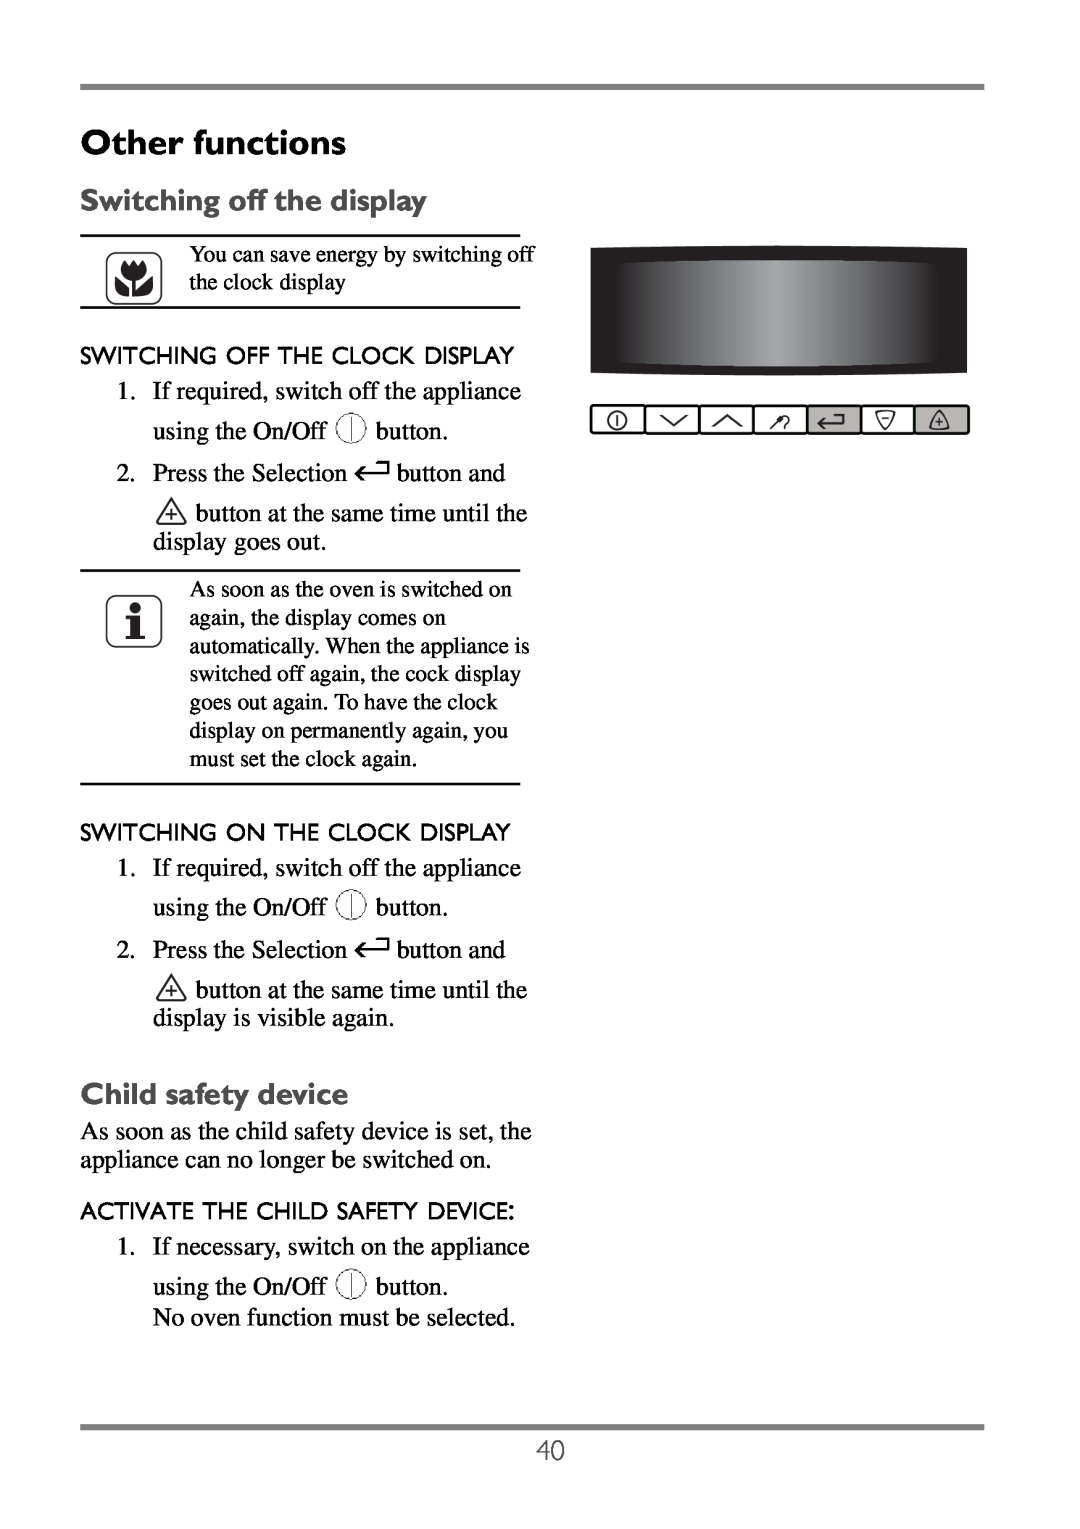 Electrolux EKC60752 user manual Other functions, Switching off the display, Child safety device 